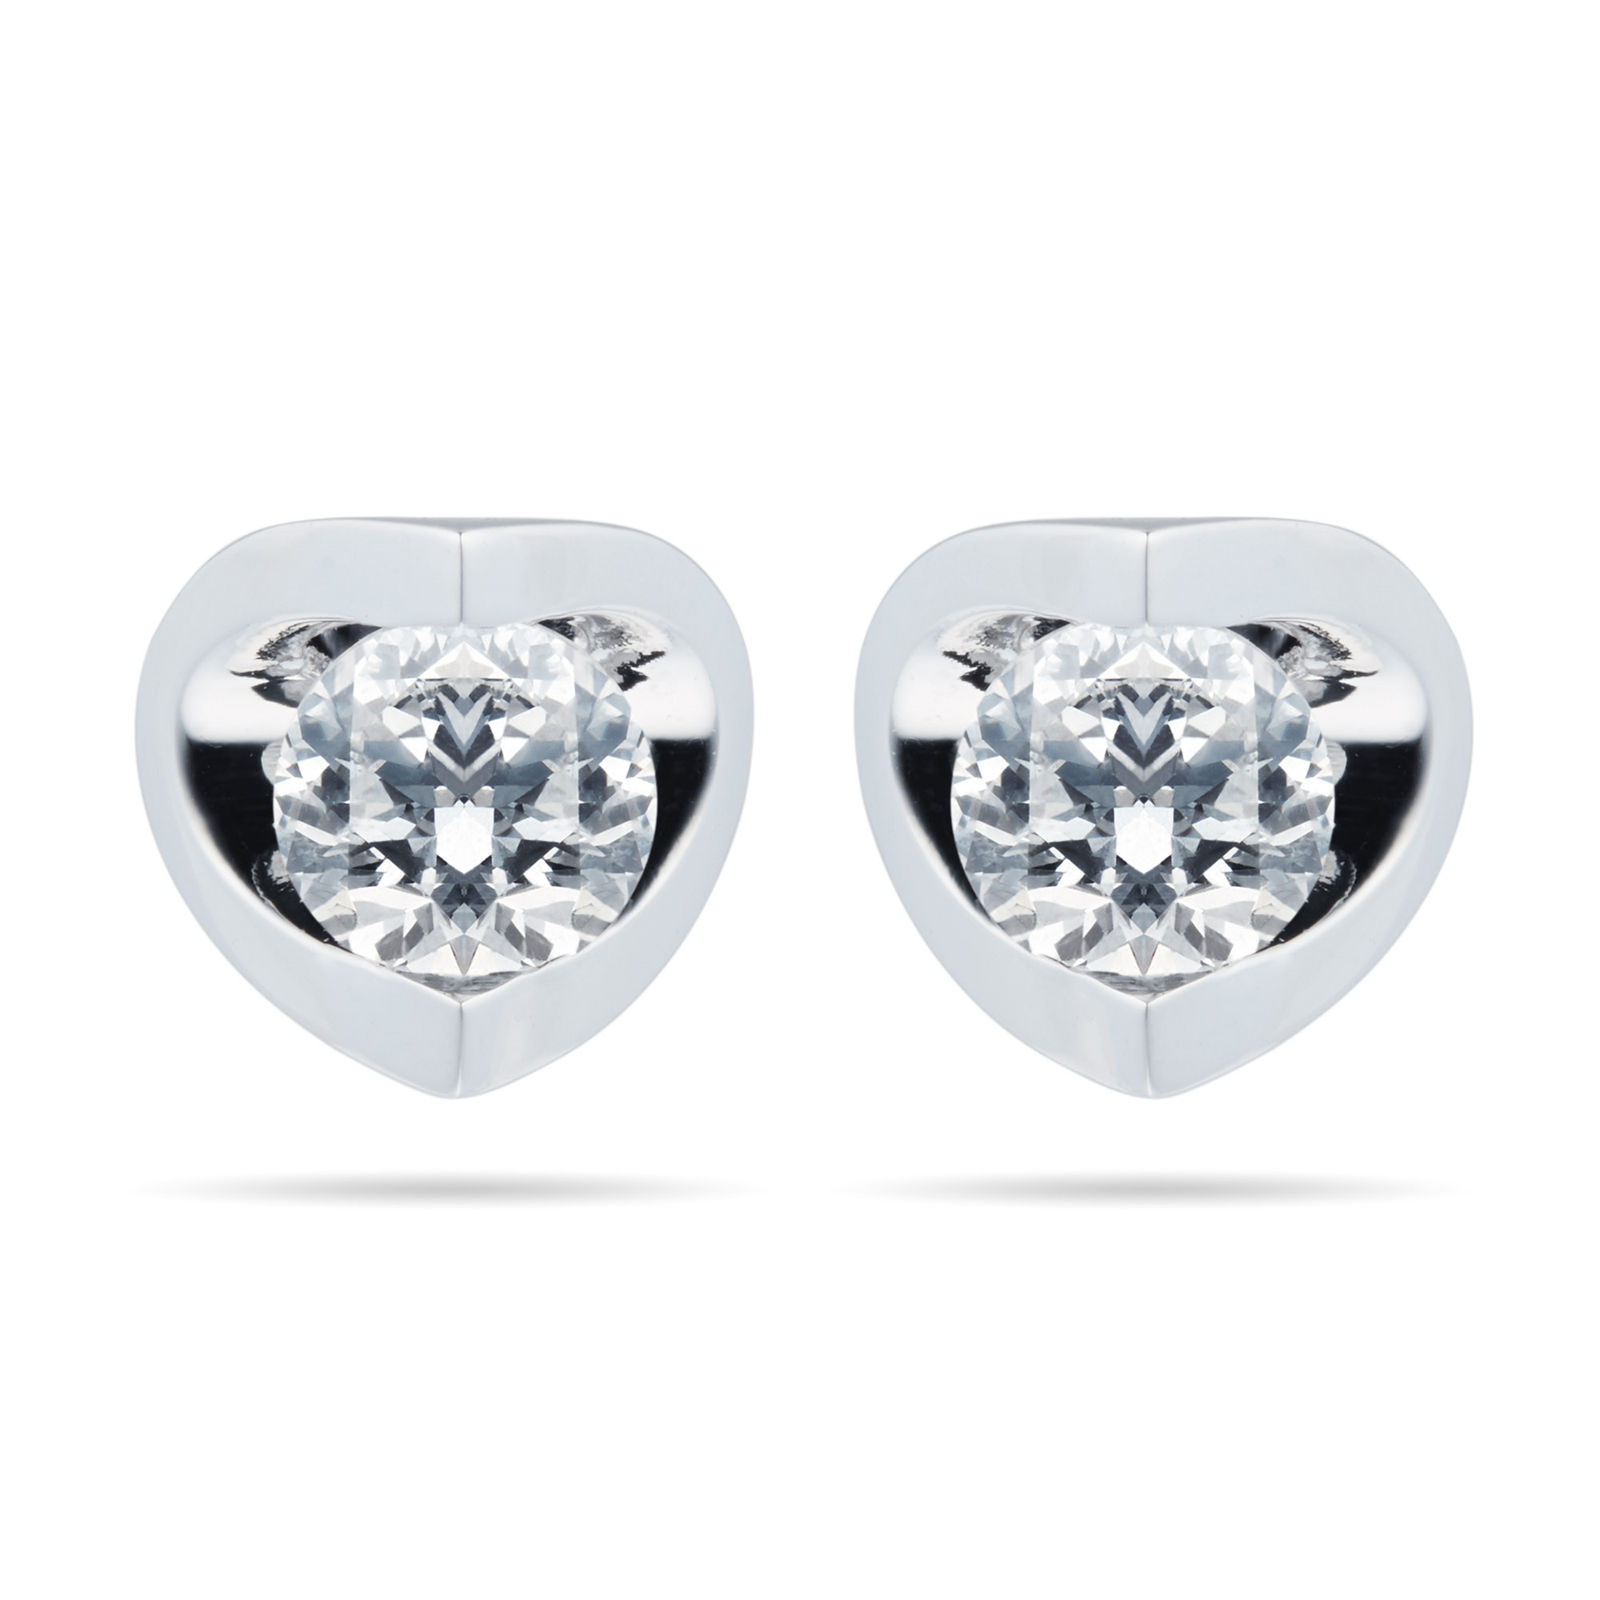 9ct White Gold 015ct 4 Claw Goldsmiths Brightest Diamond Earrings   35000  Bullring